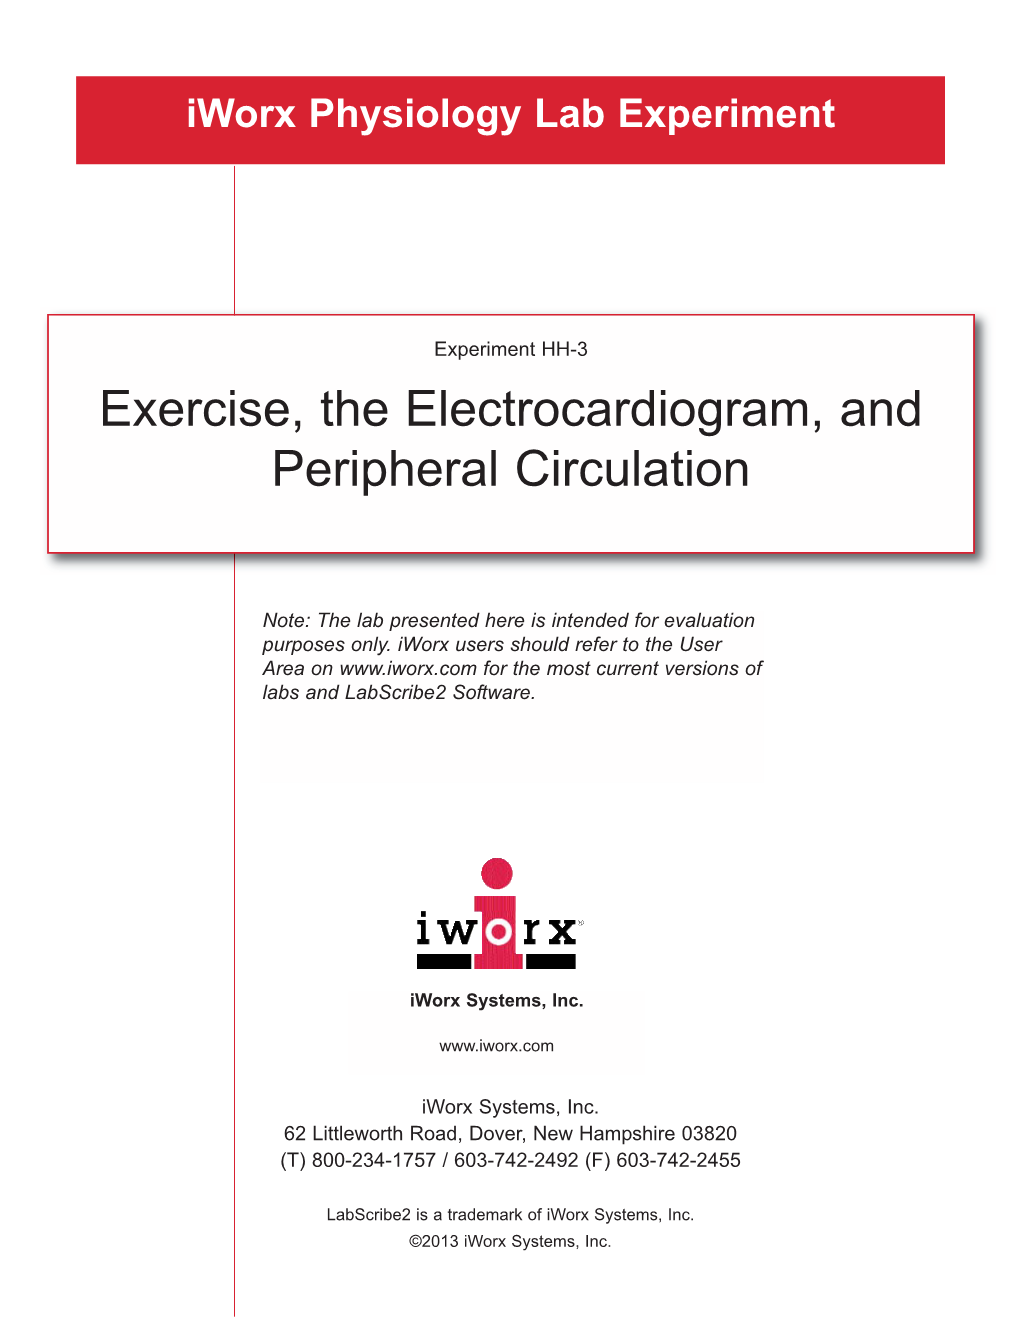 Exercise, the Electrocardiogram, and Peripheral Circulation